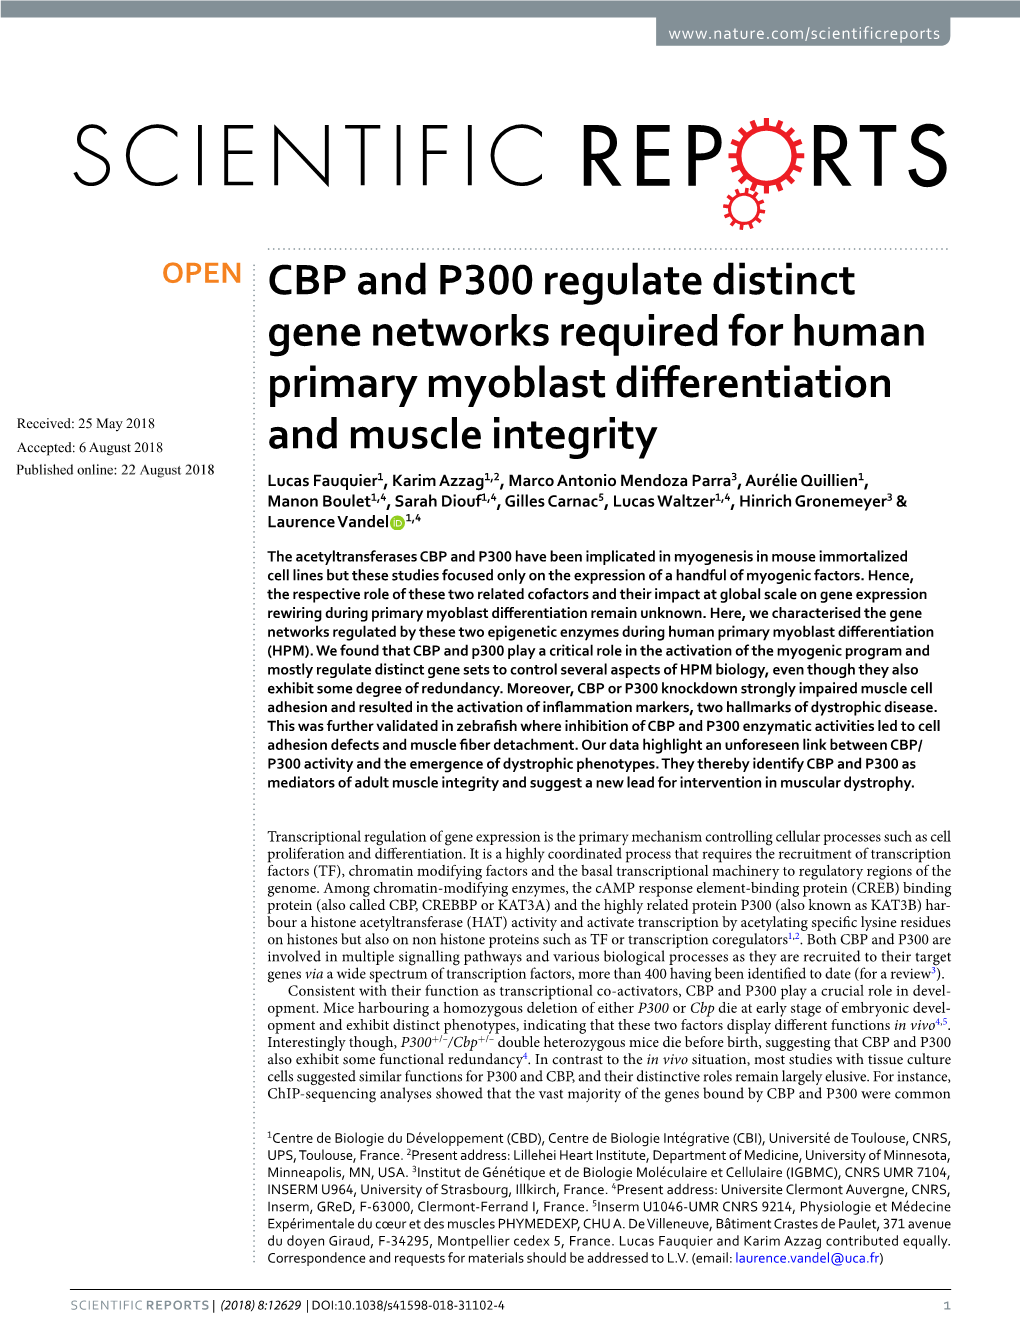 CBP and P300 Regulate Distinct Gene Networks Required for Human